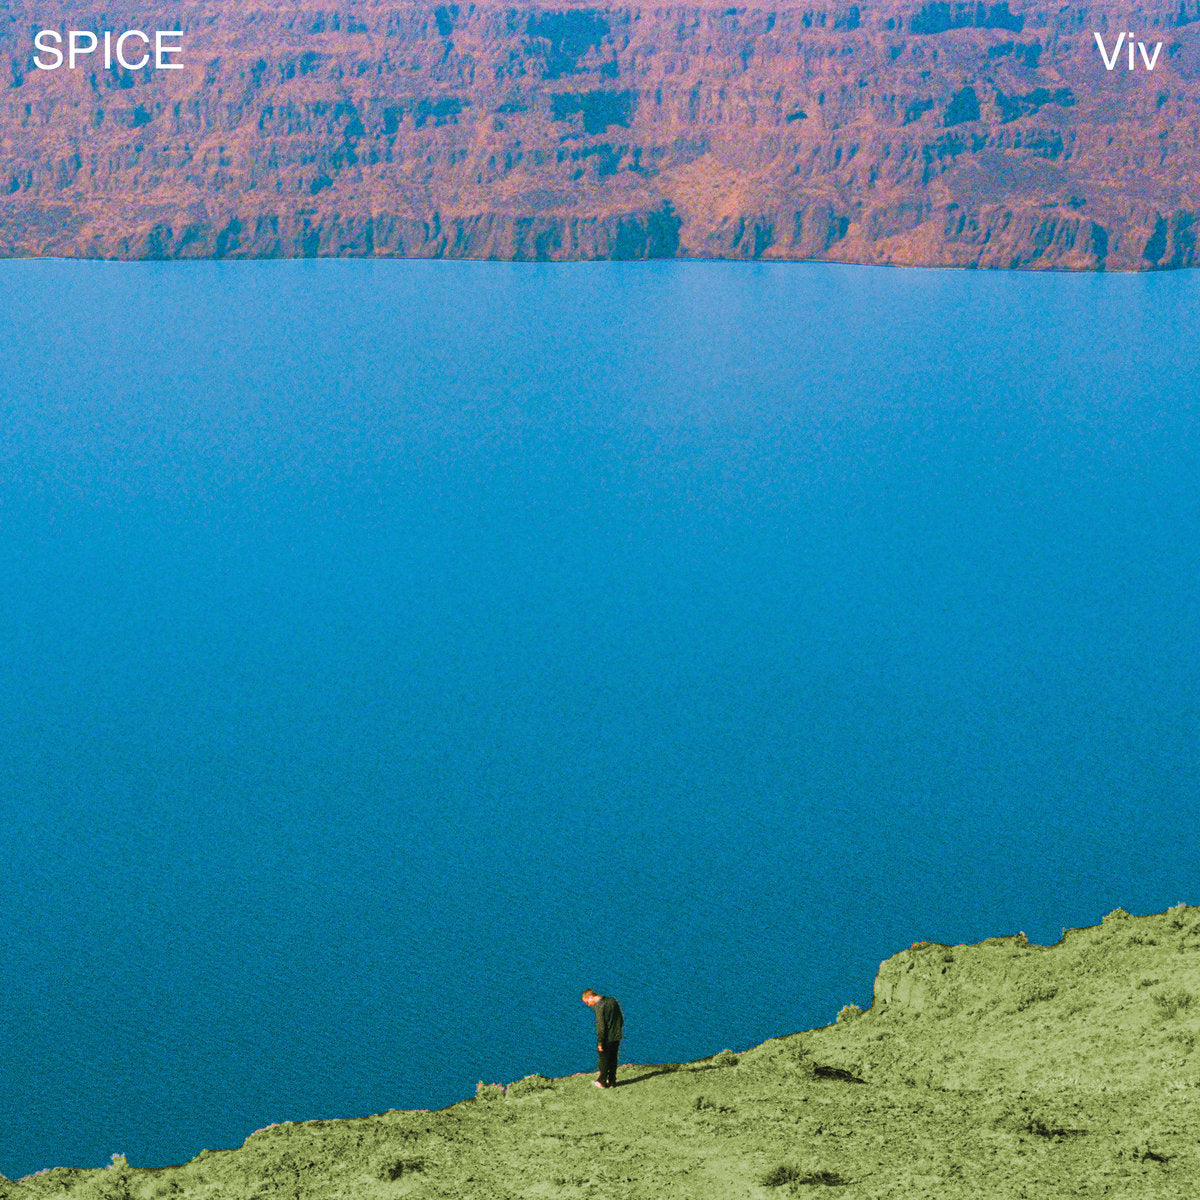 Spice - Viv (Limited Edition of 600 on Transparent Clear Vinyl)